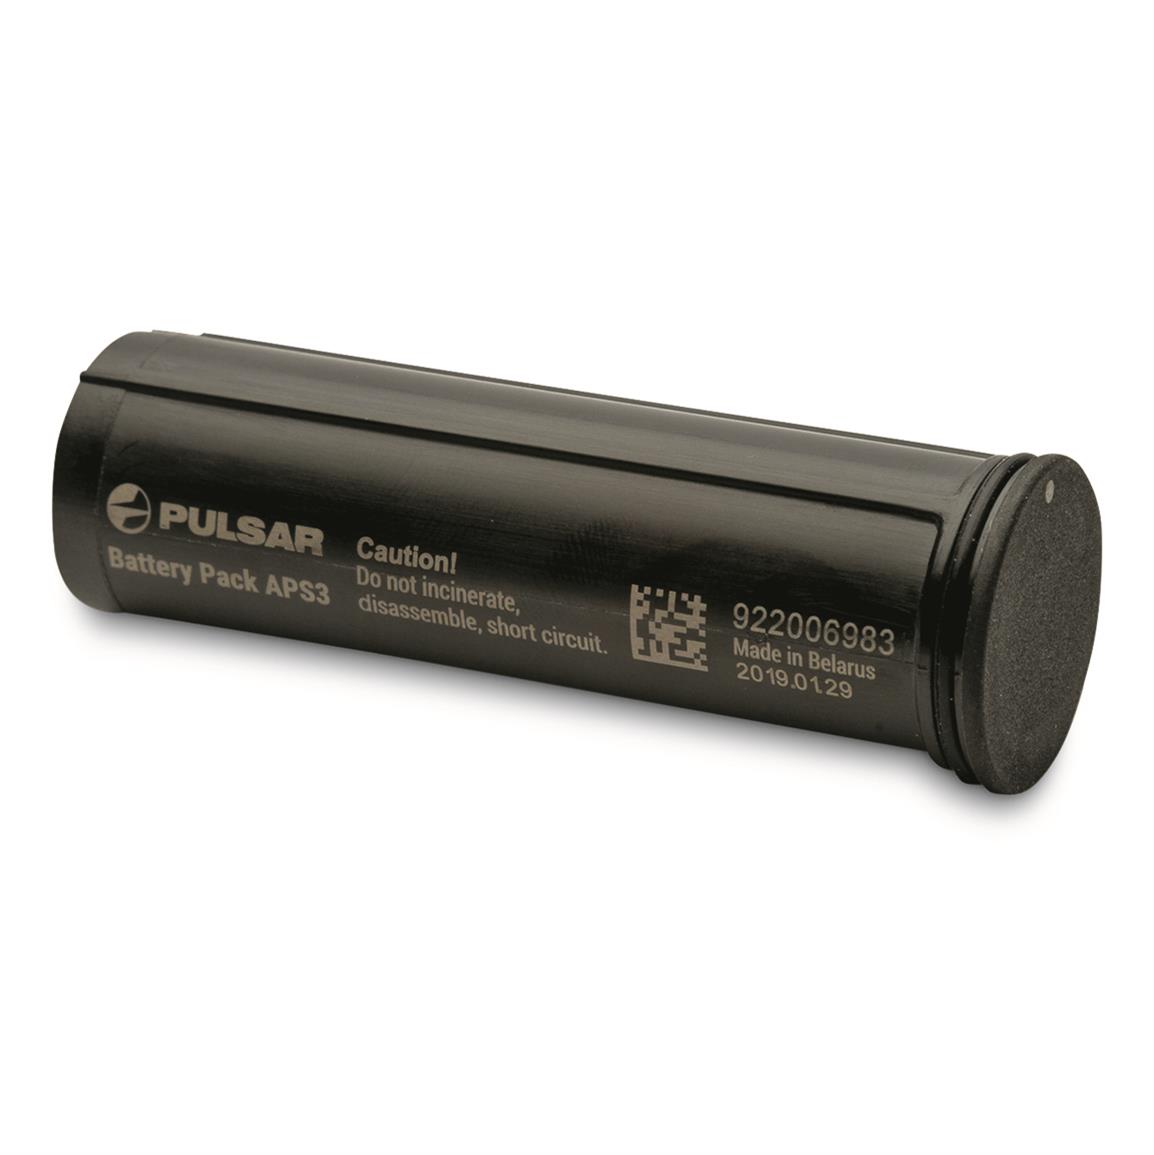 Pulsar APS3 Battery Pack for Axiom XM/Thermion/Digex/Merger LRF